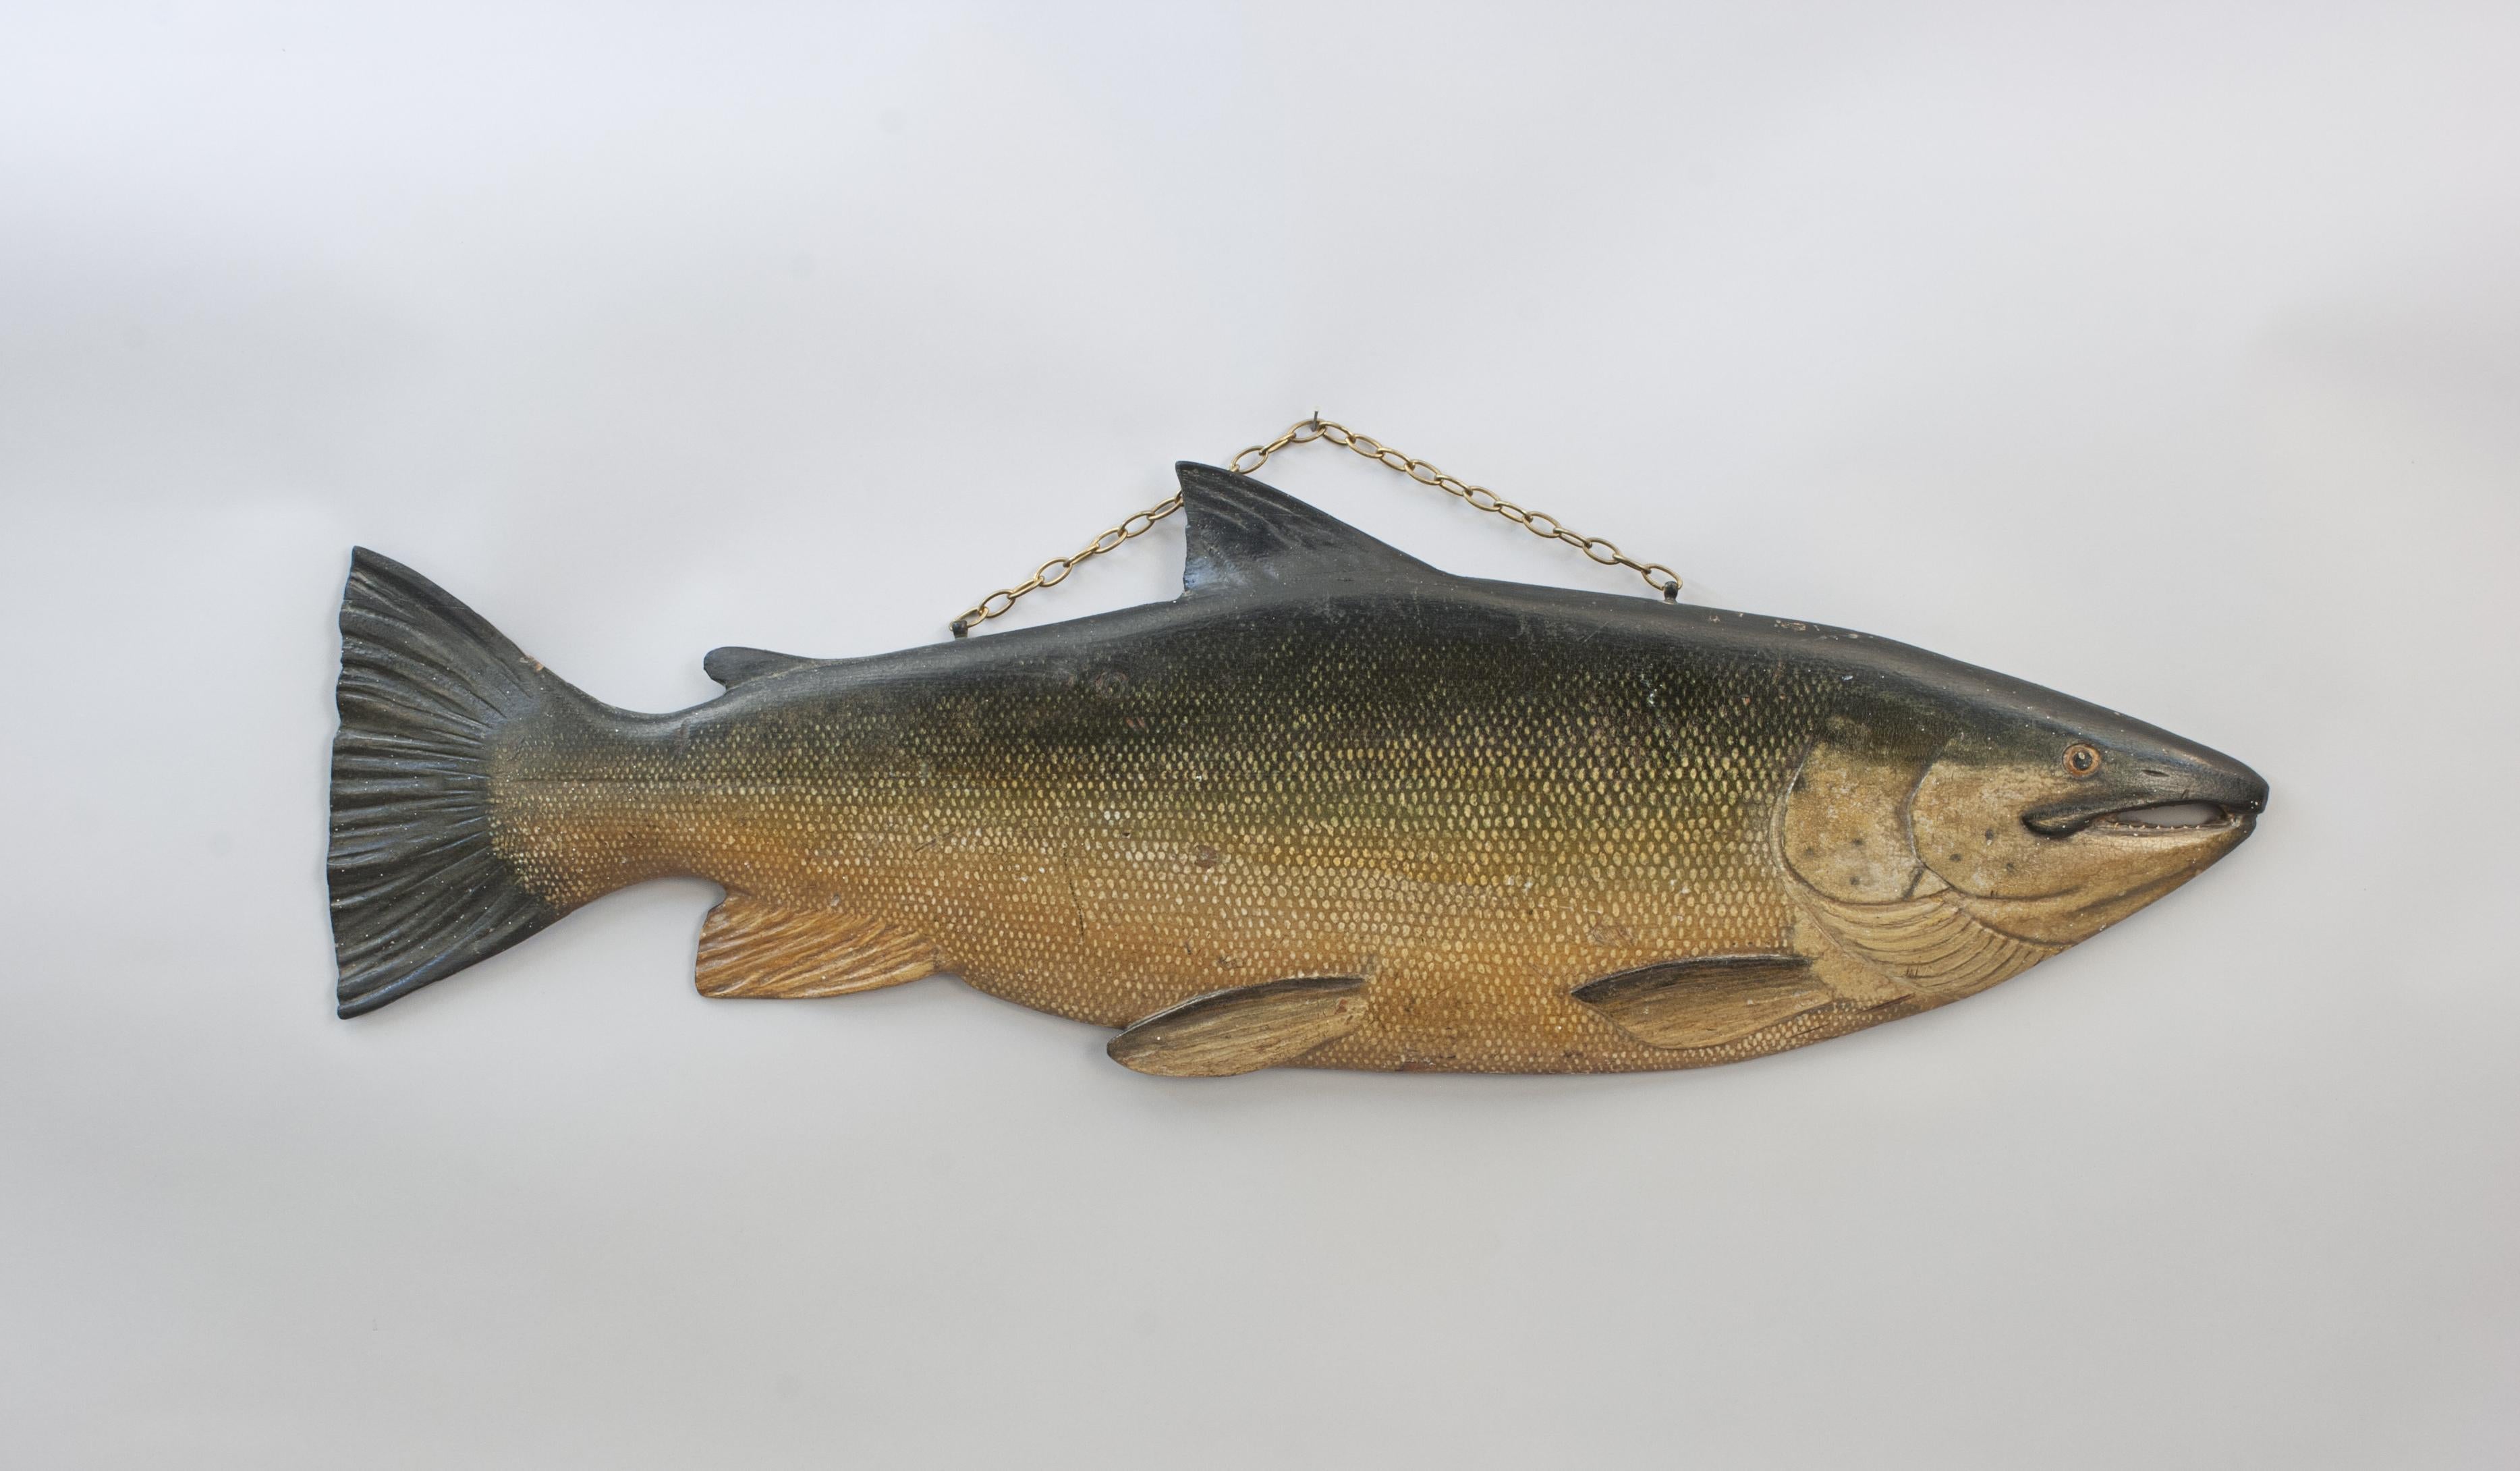 Salmon Trophy Fish Model
A nice carved wooden half block salmon carved with teeth, dorsal fin, adipose fin, pectoral fin, pelvic fin, anal fin and tail fin, the eye also carved out in semi relief. The salmon is painted to a high standard with